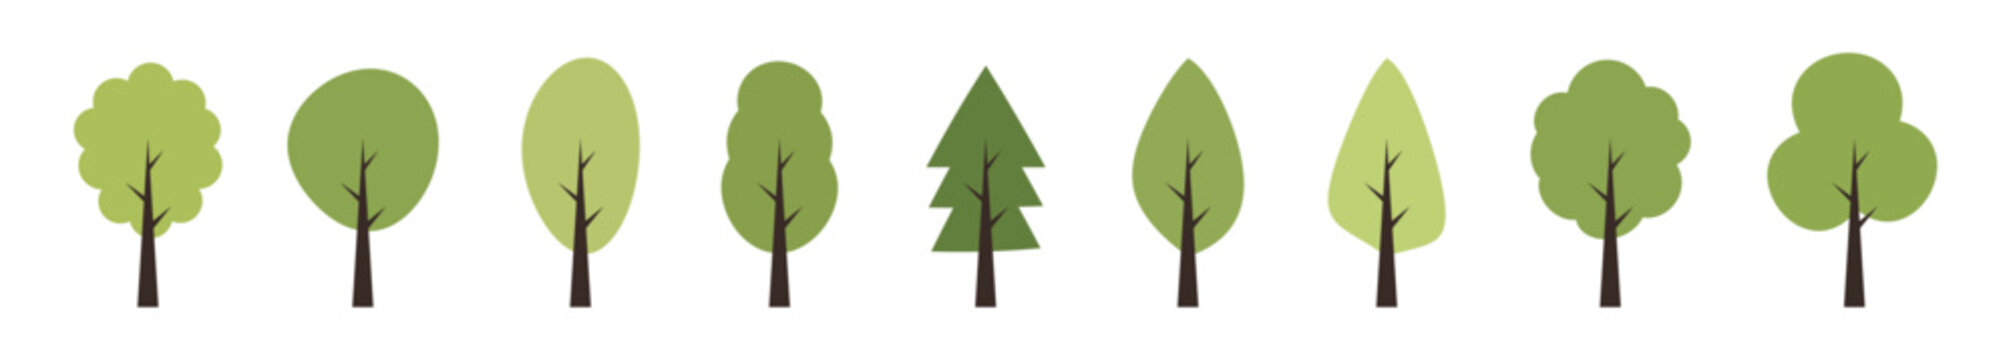 Tree green icon collection. Wood with leaf in flat style. Nature graphic element. Eco symbols isolated on white background. Vector illustration.